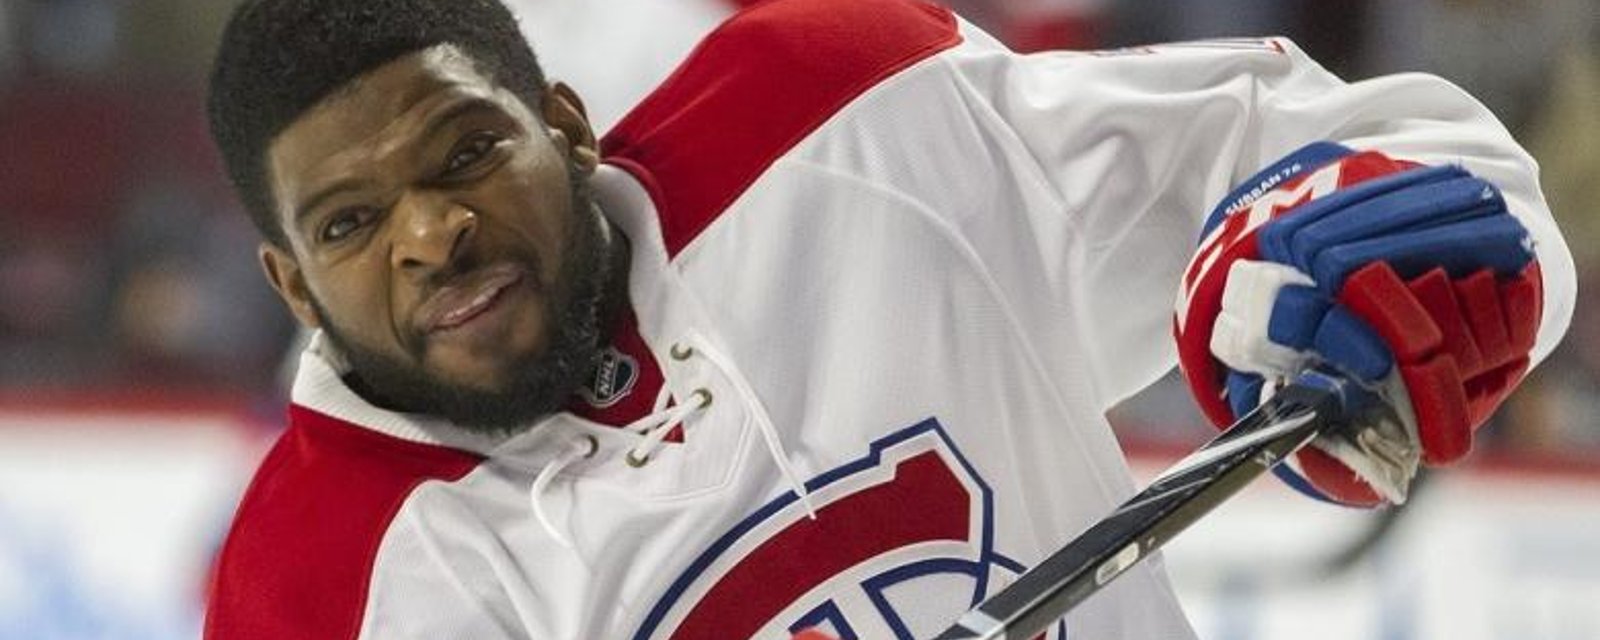 Breaking: Source confirms ugly rumors involving the Canadiens that surfaced yesterday.